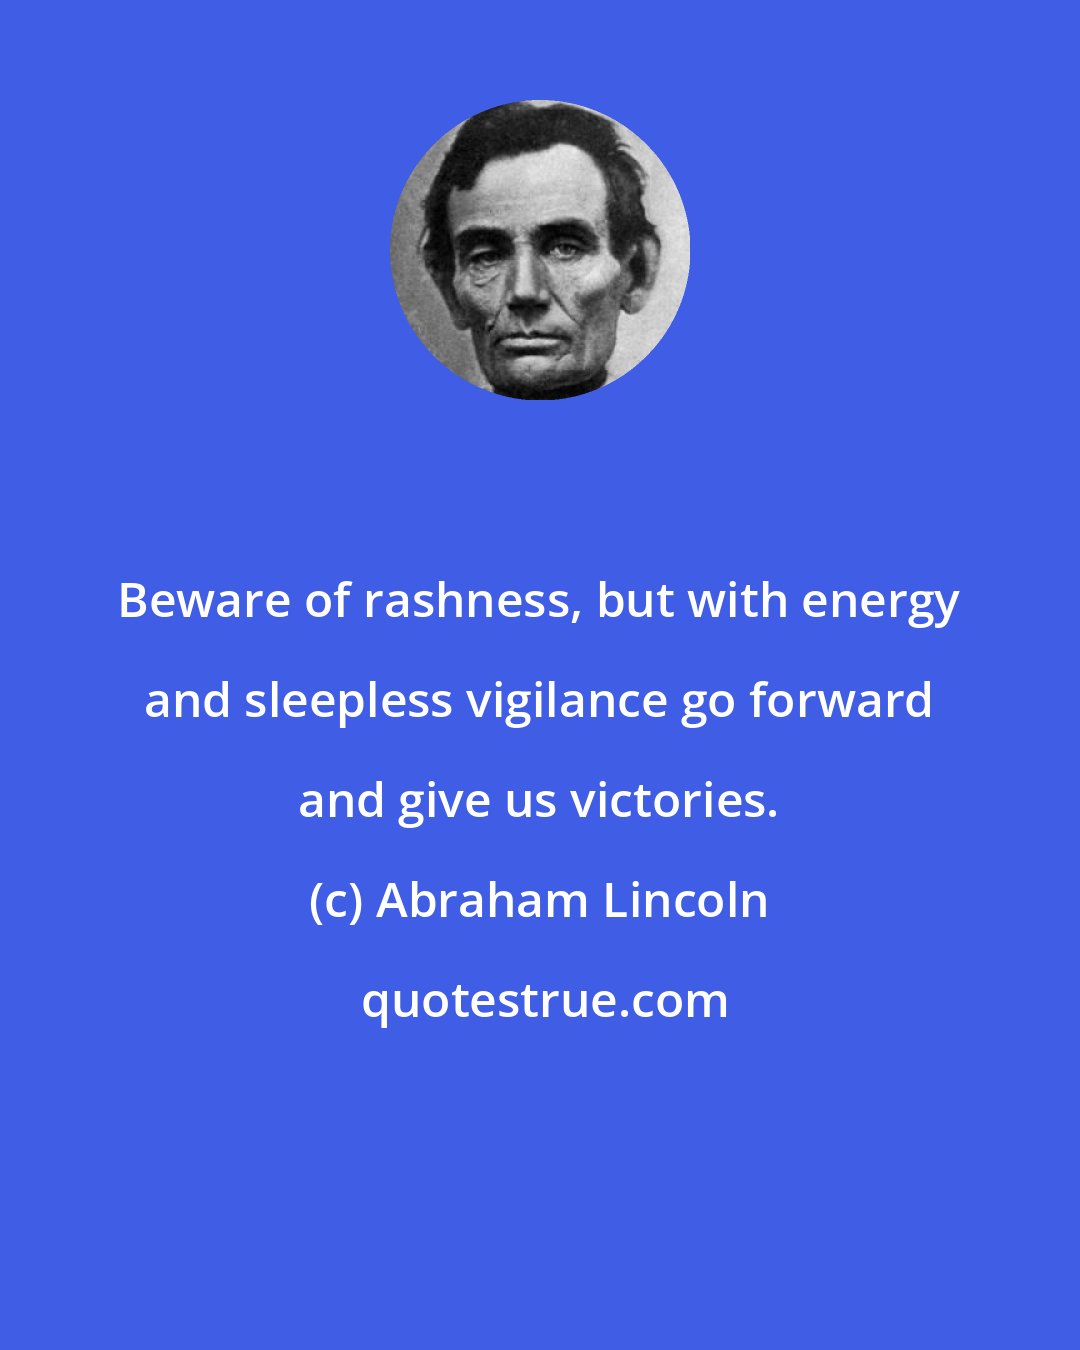 Abraham Lincoln: Beware of rashness, but with energy and sleepless vigilance go forward and give us victories.